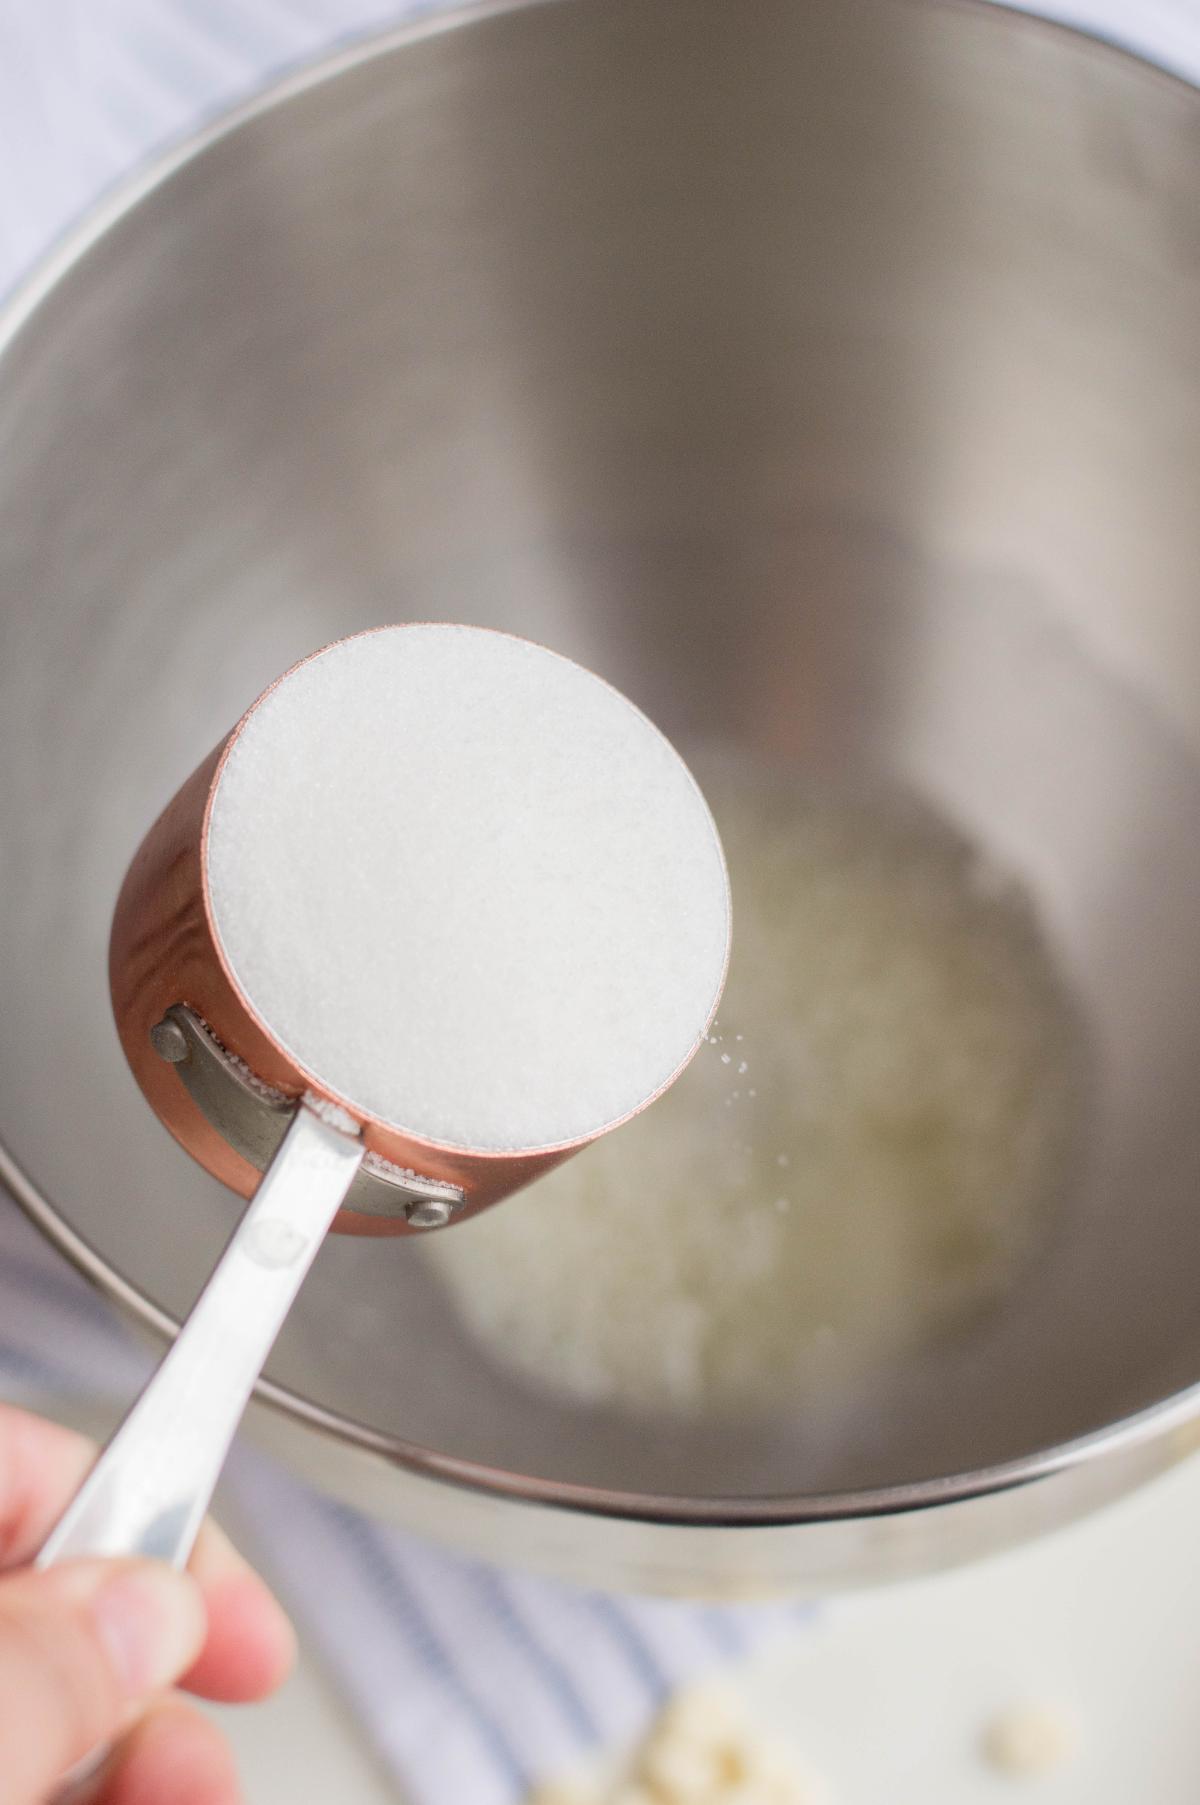 Granulated sugar is added to the egg mixture.